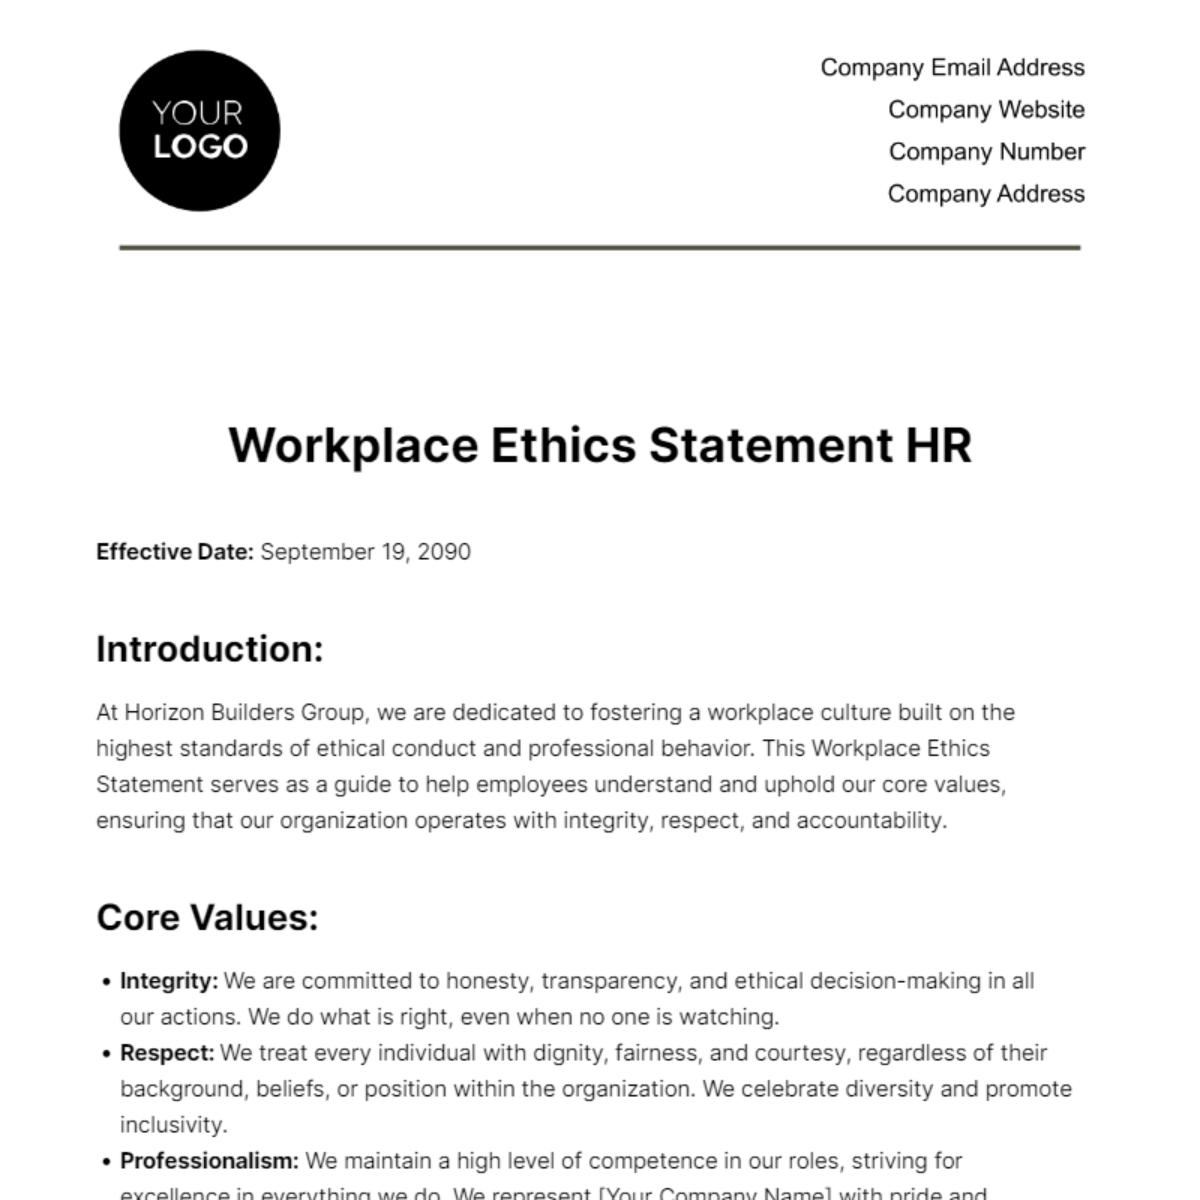 Workplace Ethics Statement HR Template